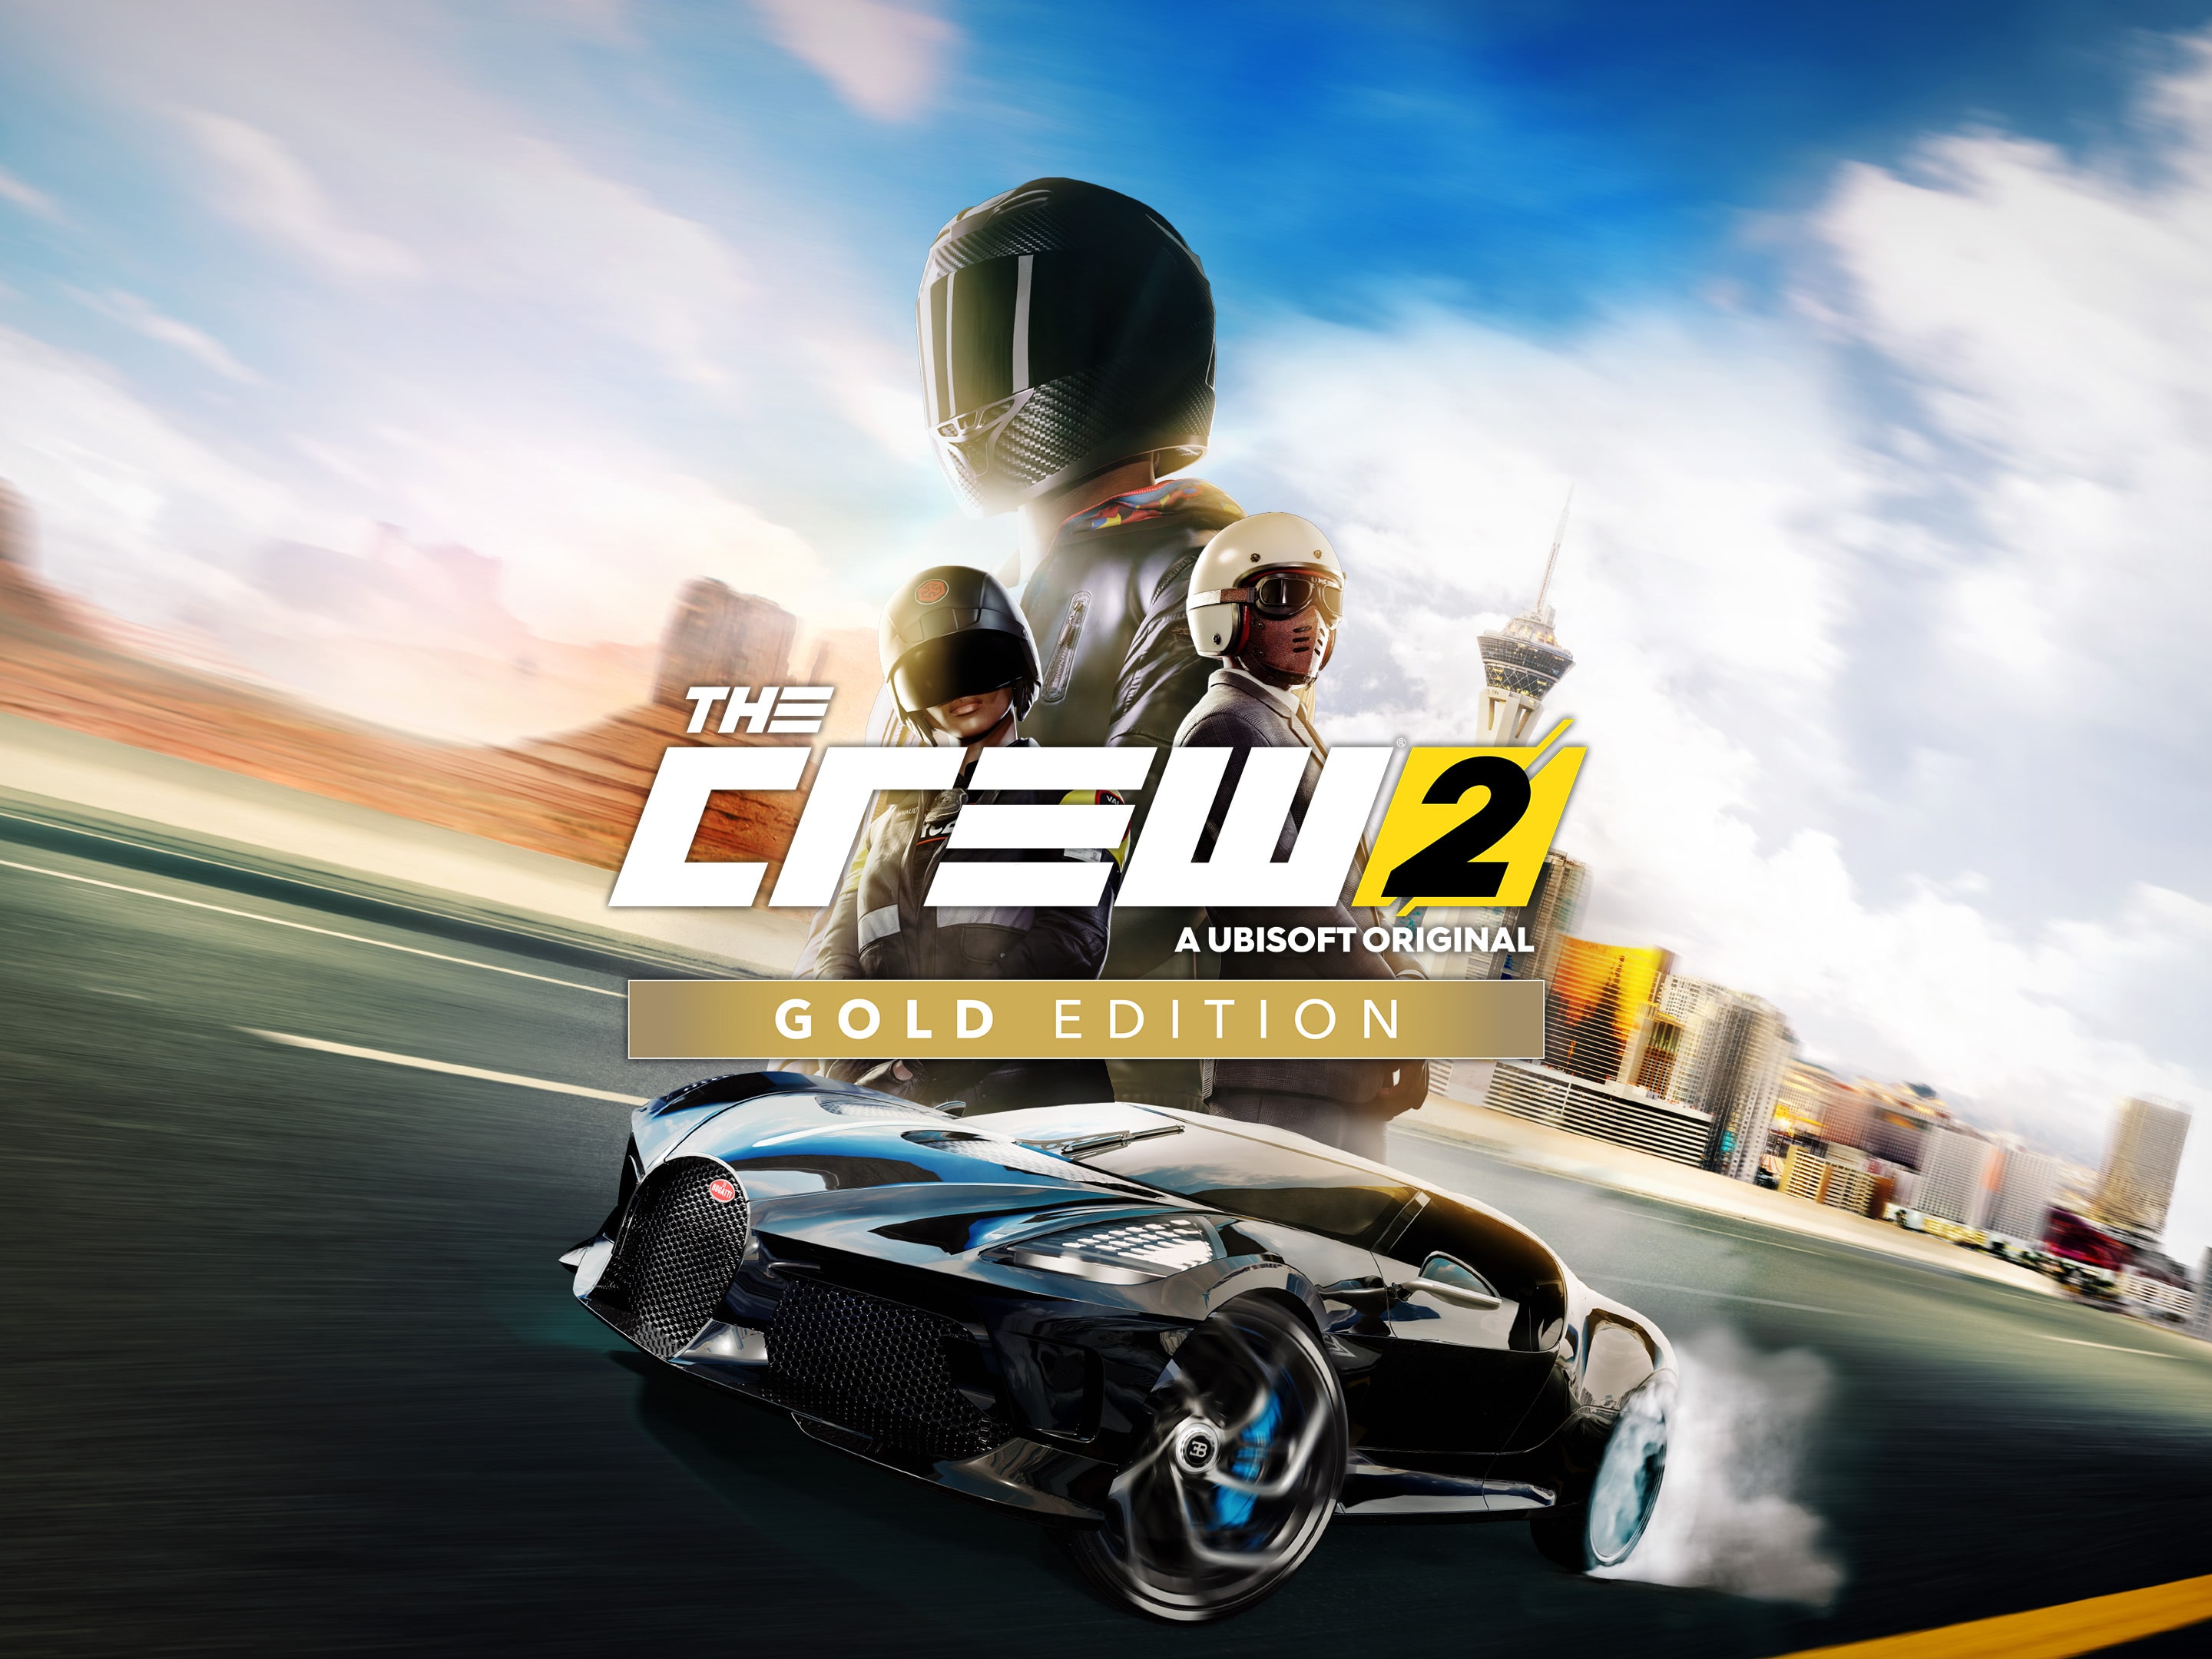 Gold Edition PC Code - Uplay The Crew 2 